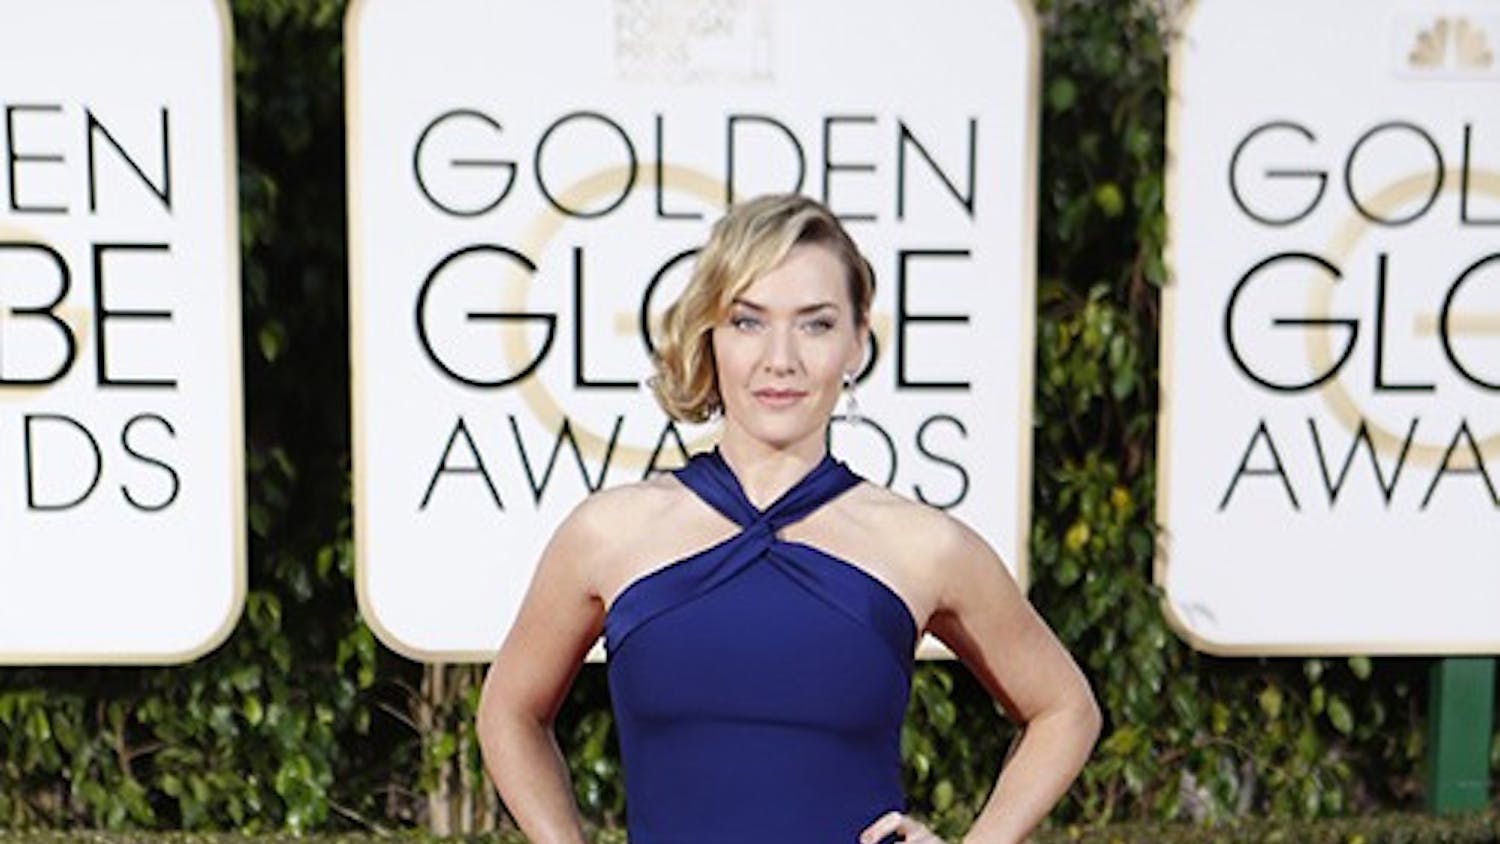 Kate Winslet arrives at the 73rd Annual Golden Globe Awards show at the Beverly Hilton Hotel in Beverly Hills, Calif., on Sunday, Jan. 10, 2016. (Wally Skalij/Los Angeles Times/TNS)